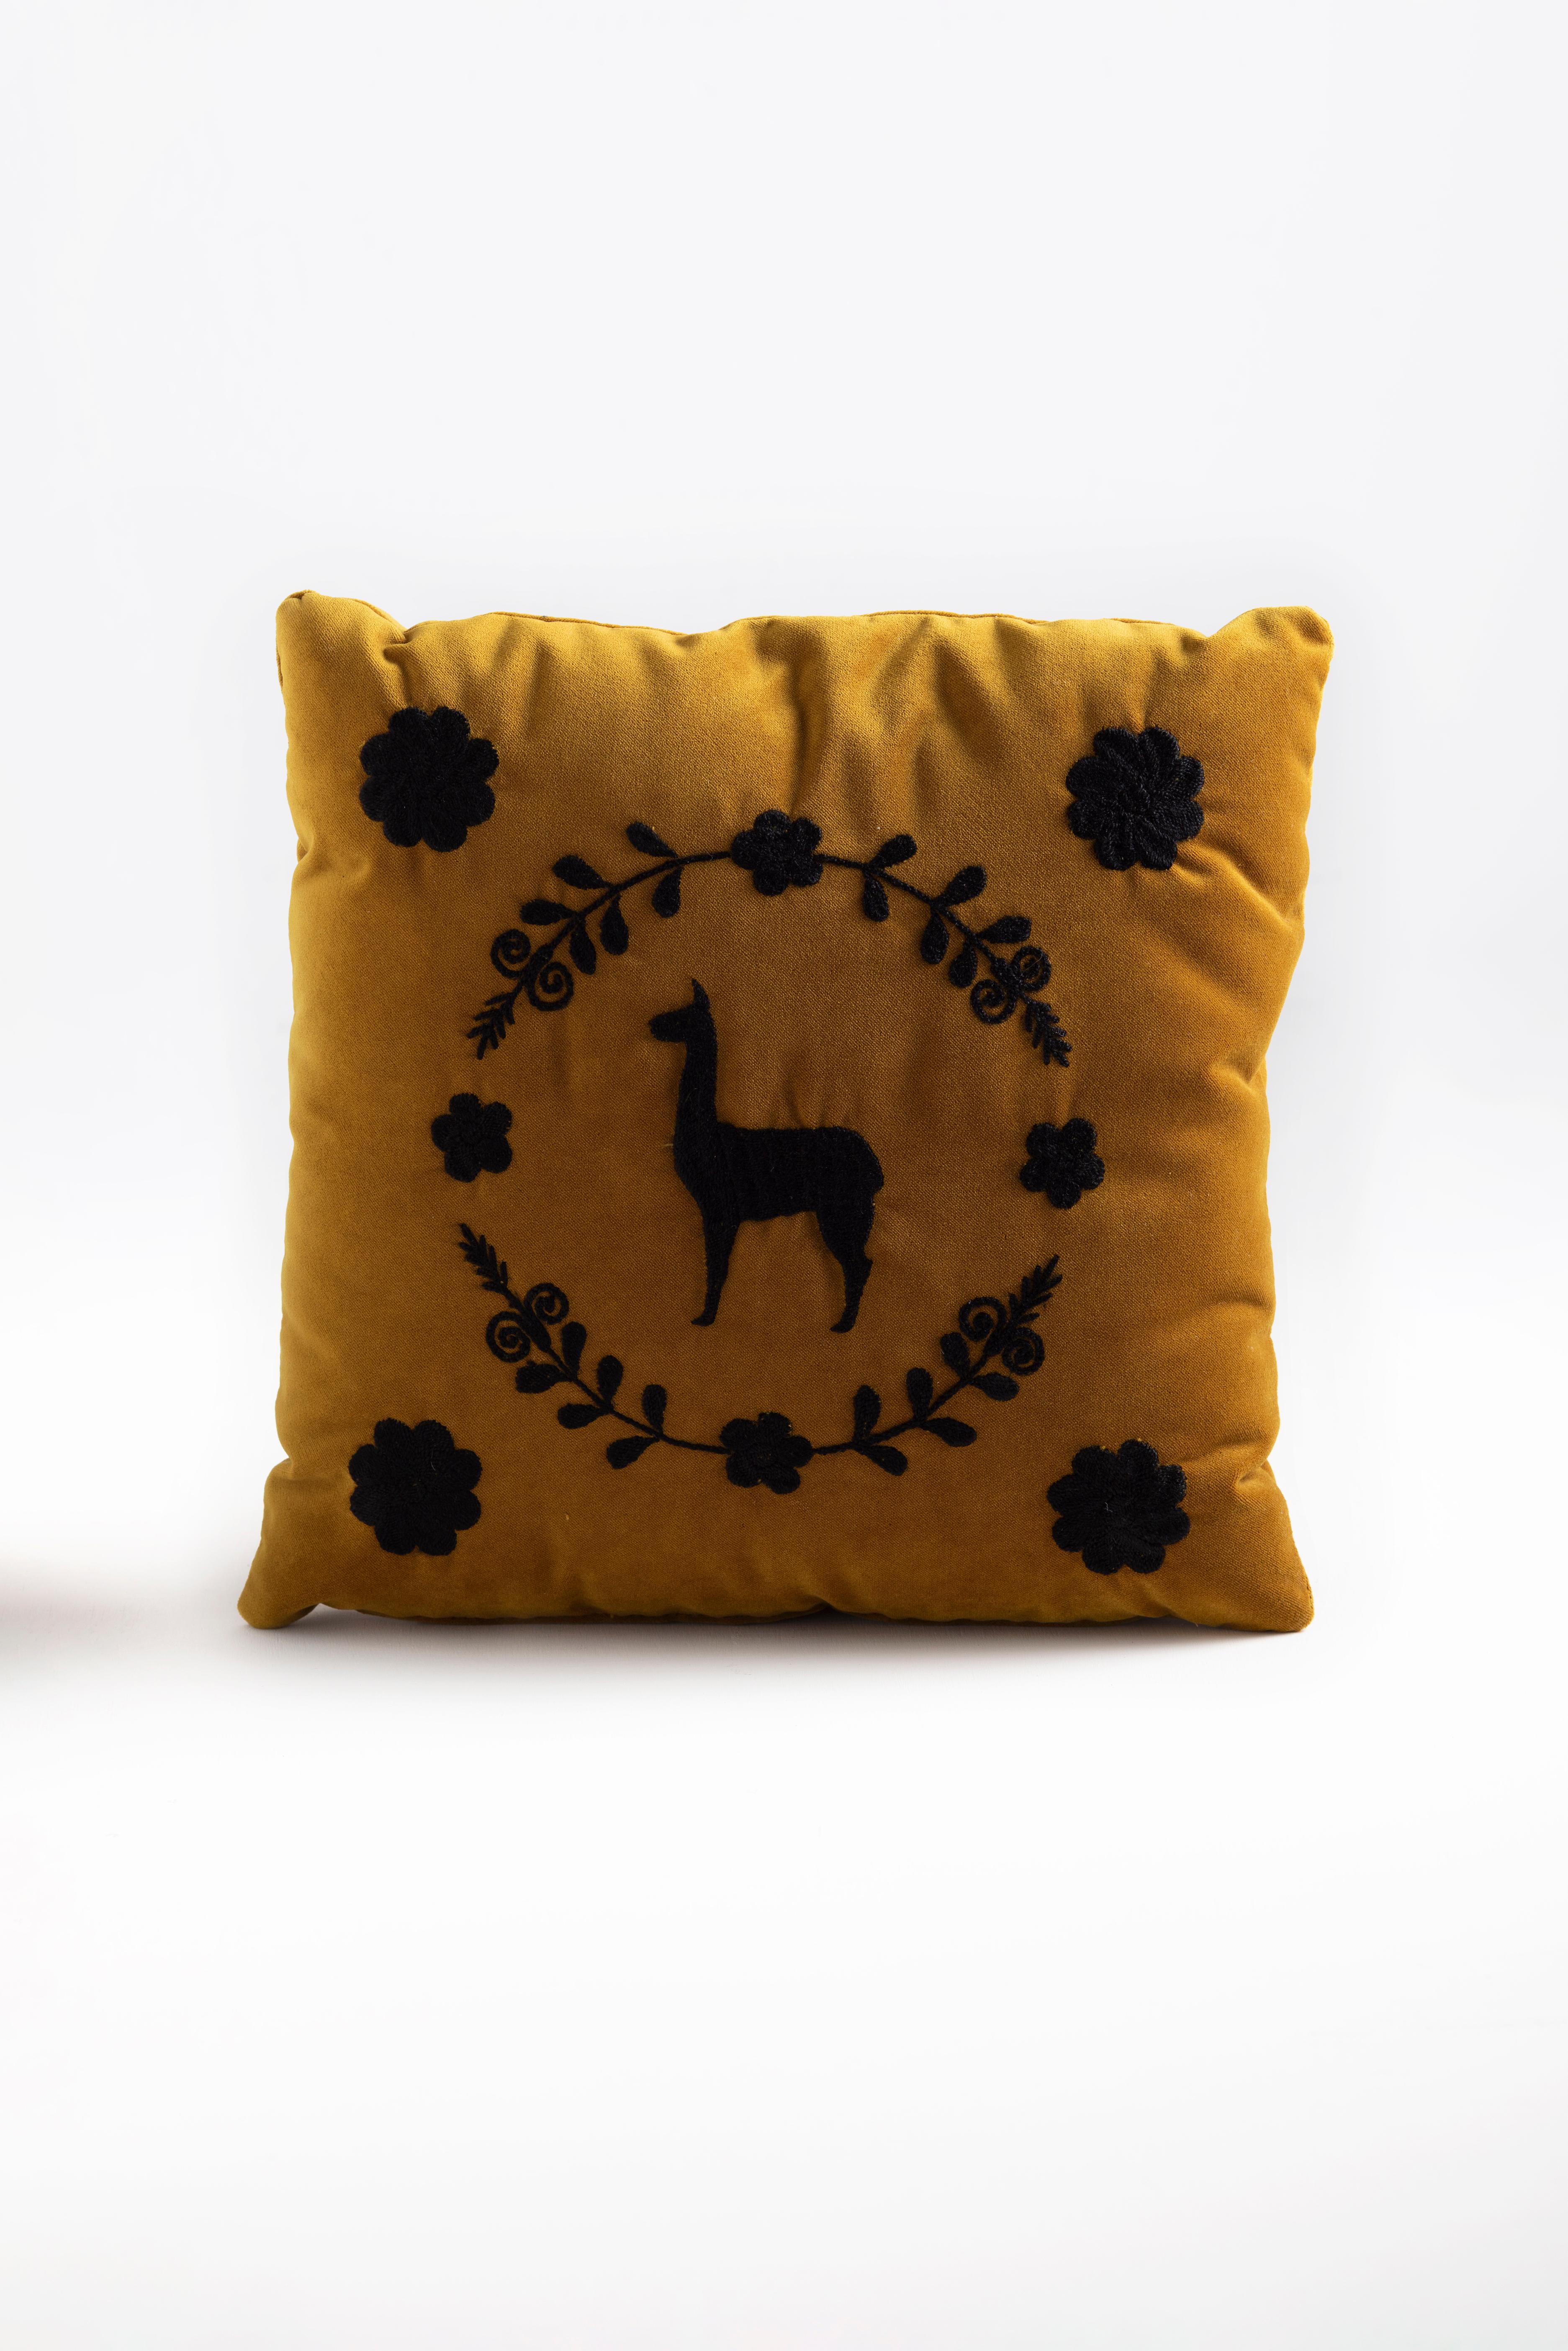 Modern LLAMA Hand Embroidered Decorative Pillows in Ochre Velvet by ANDEAN, Set of 2 For Sale